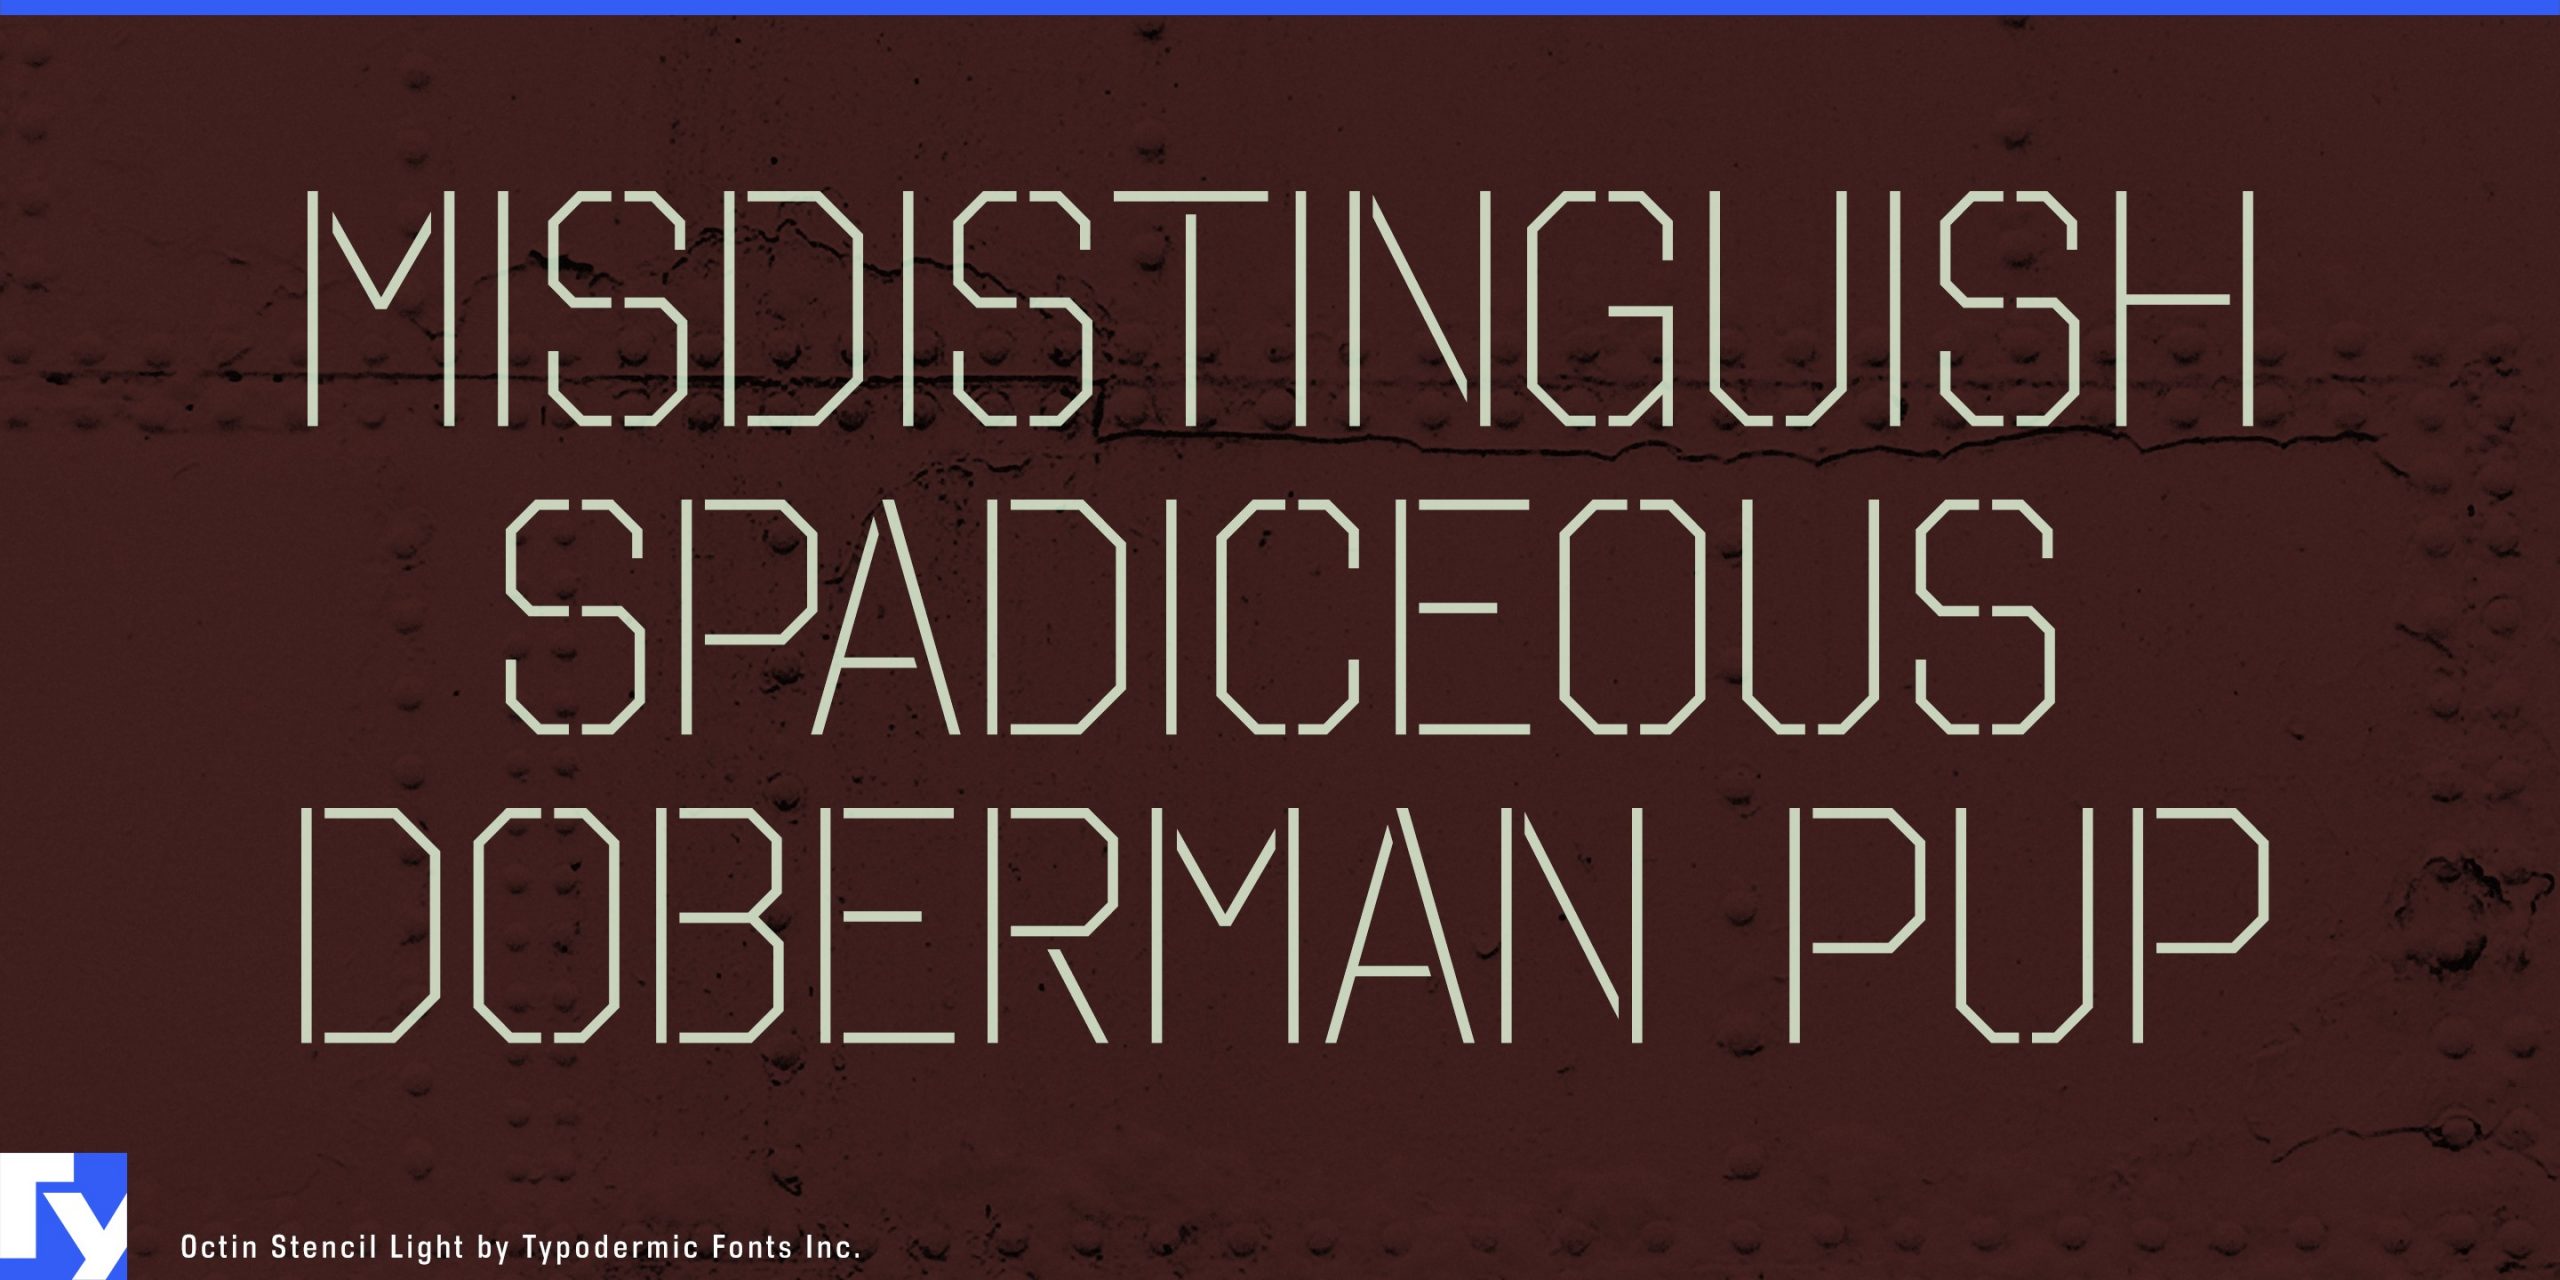 Commanding Presence: Octin Stencil Typeface Takes Center Stage